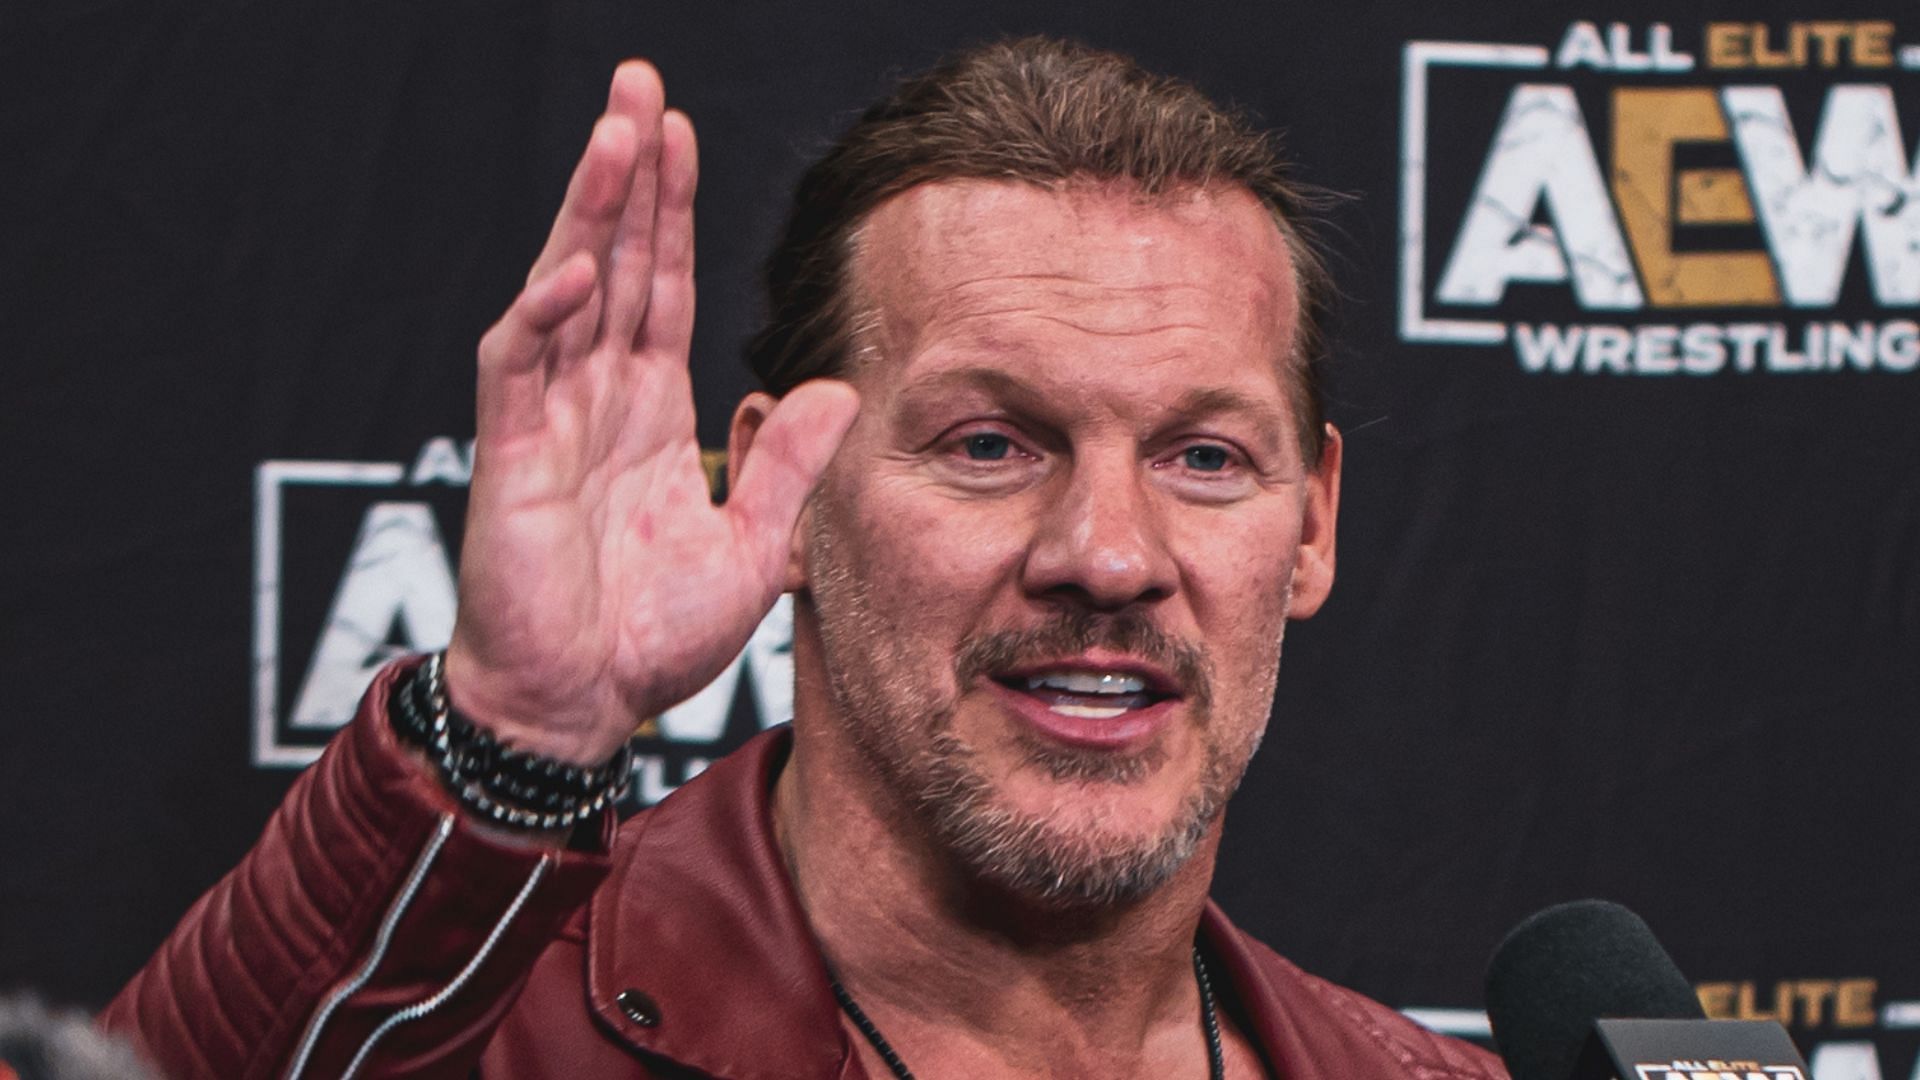 Chris Jericho at an AEW press conference